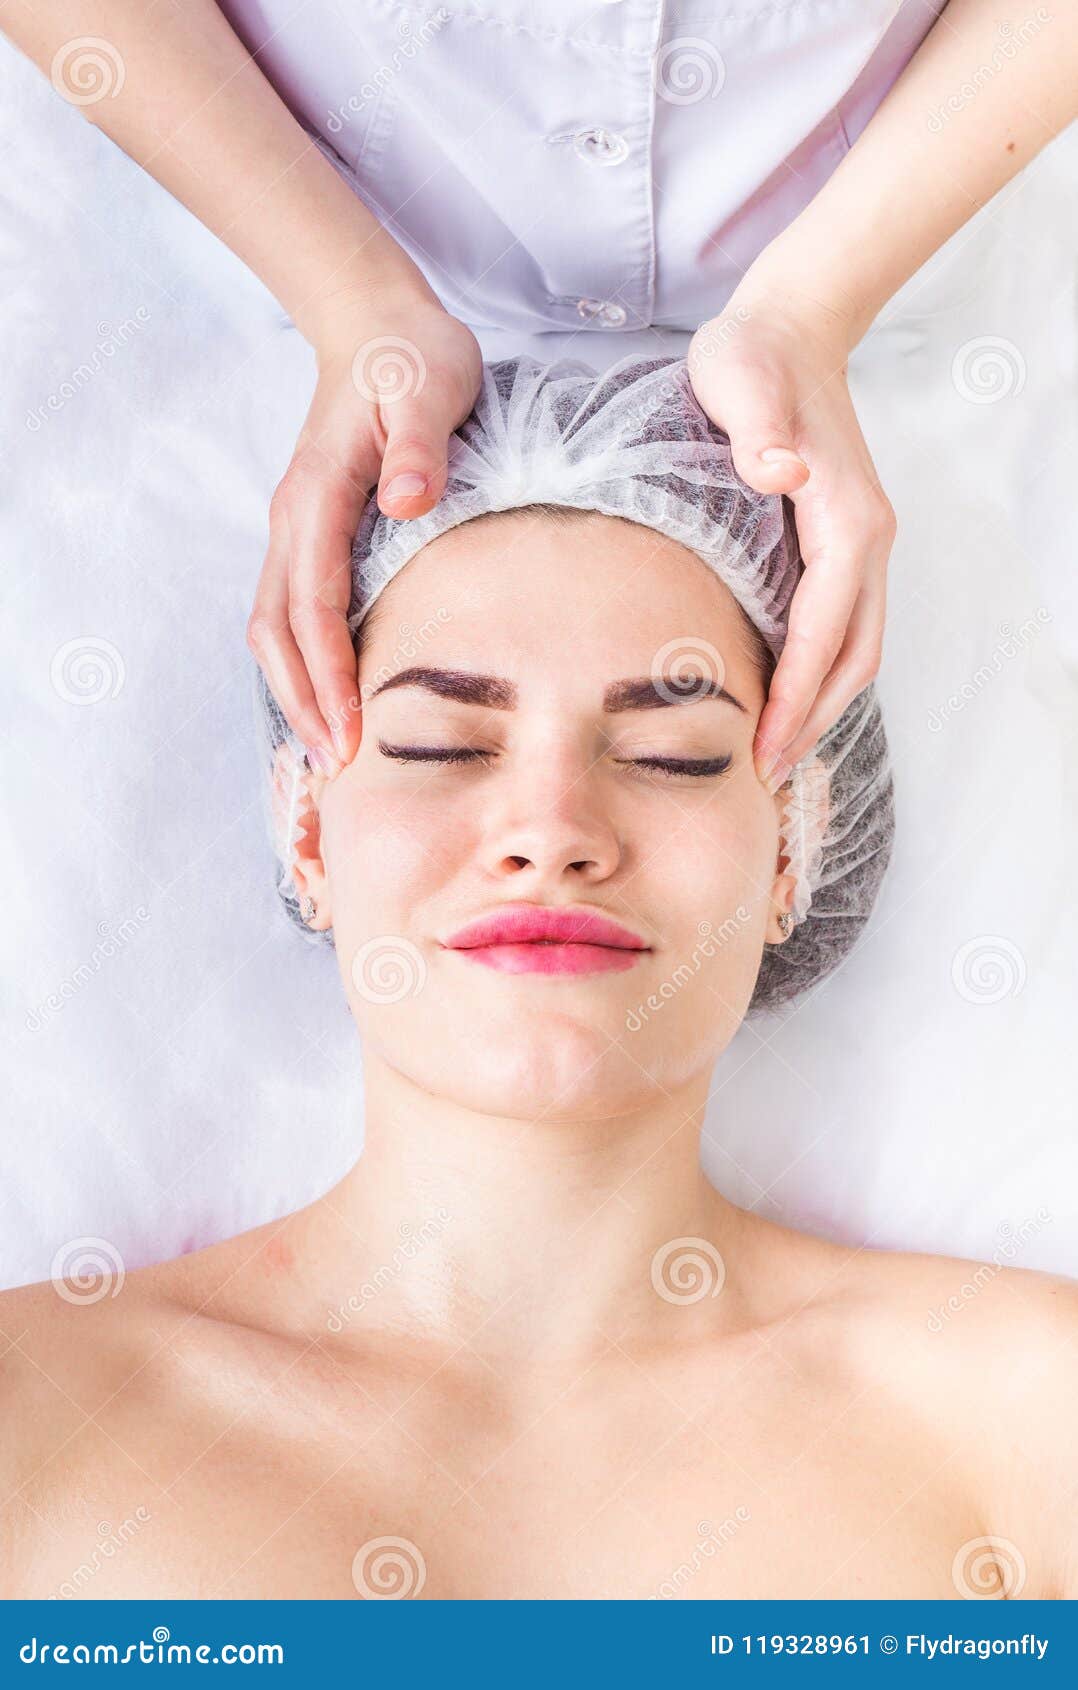 Professional Lymphodrainage Facial Massage The Cosmetologist Is Touching The Client`s Forehead